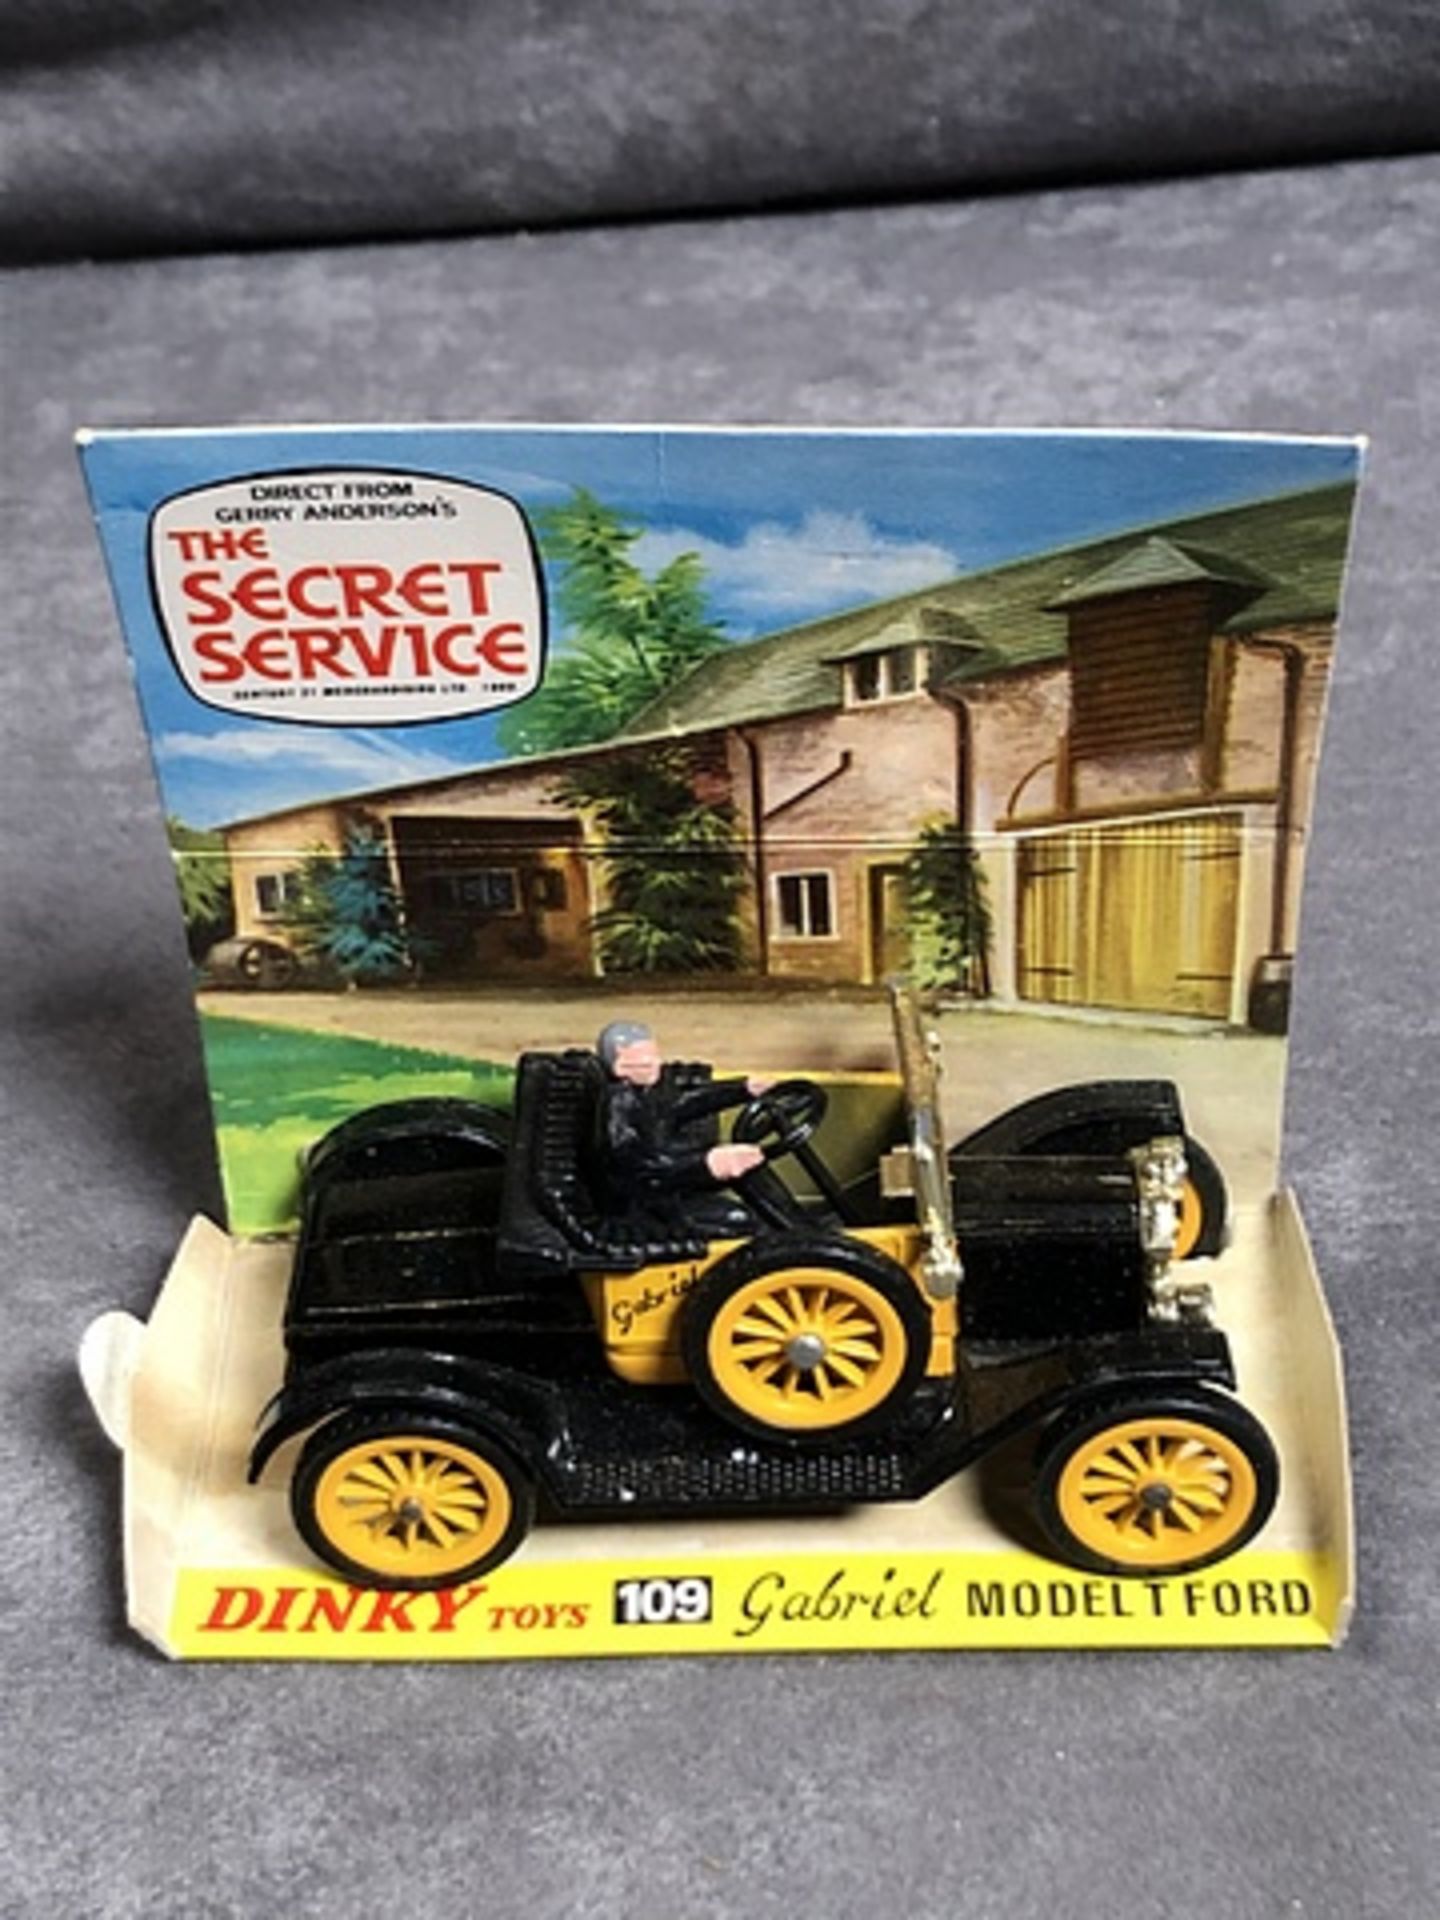 Dinky Toys Diecast #109 Direct From Gerry Anderson's The Secret Service Gabriel Model T Ford Model